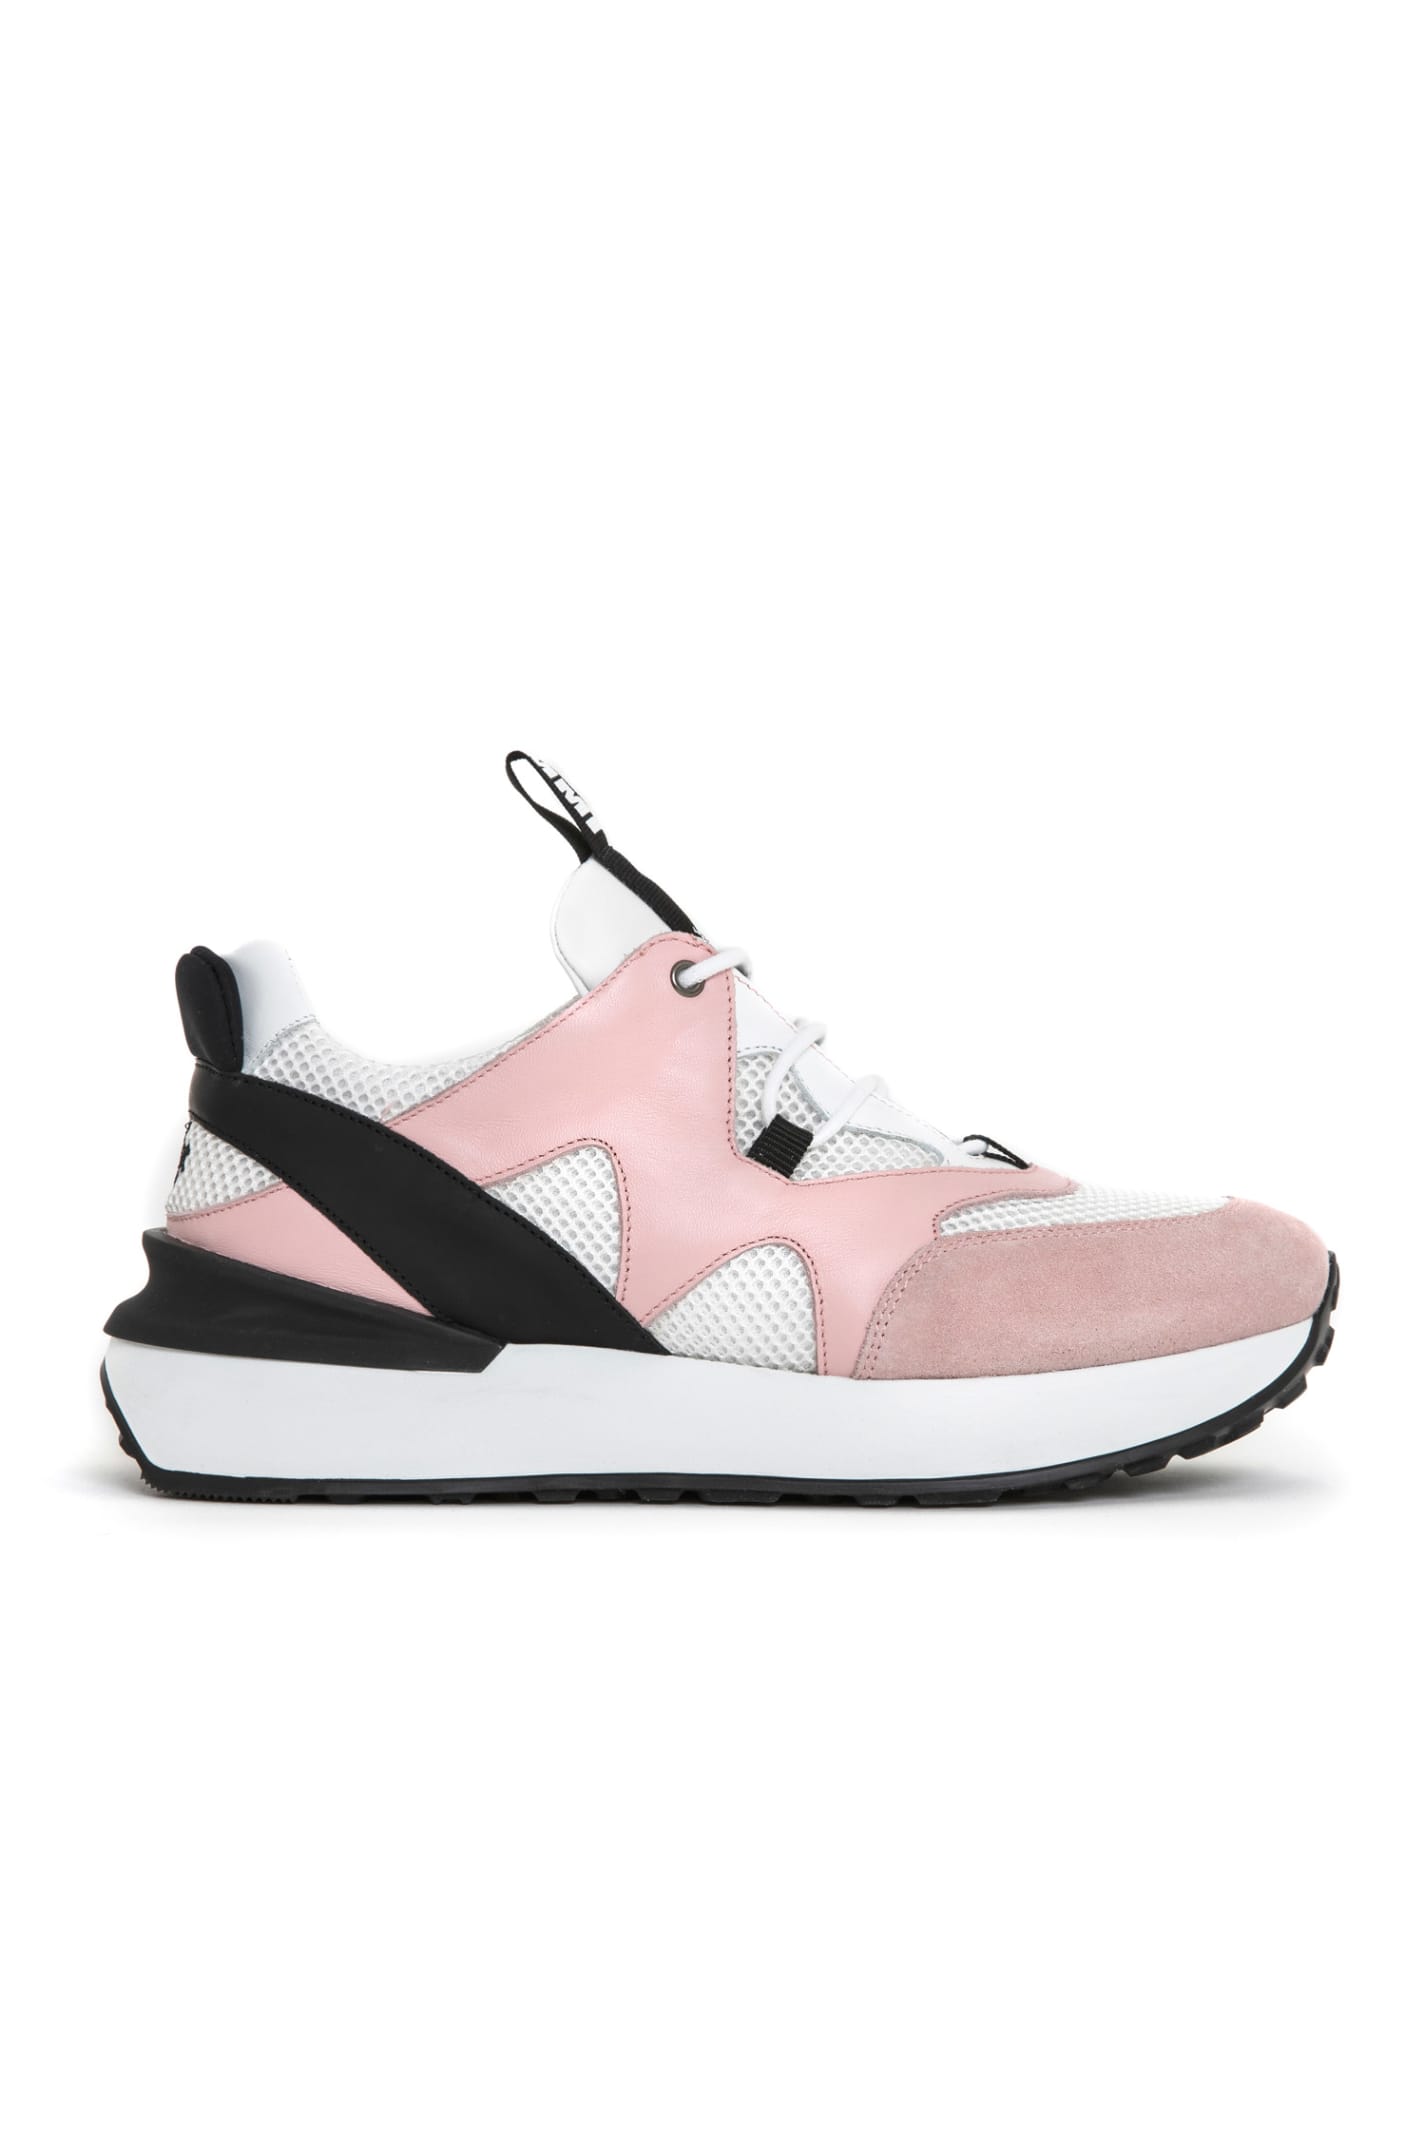 Mr & Mrs Italy Sneakers For Woman